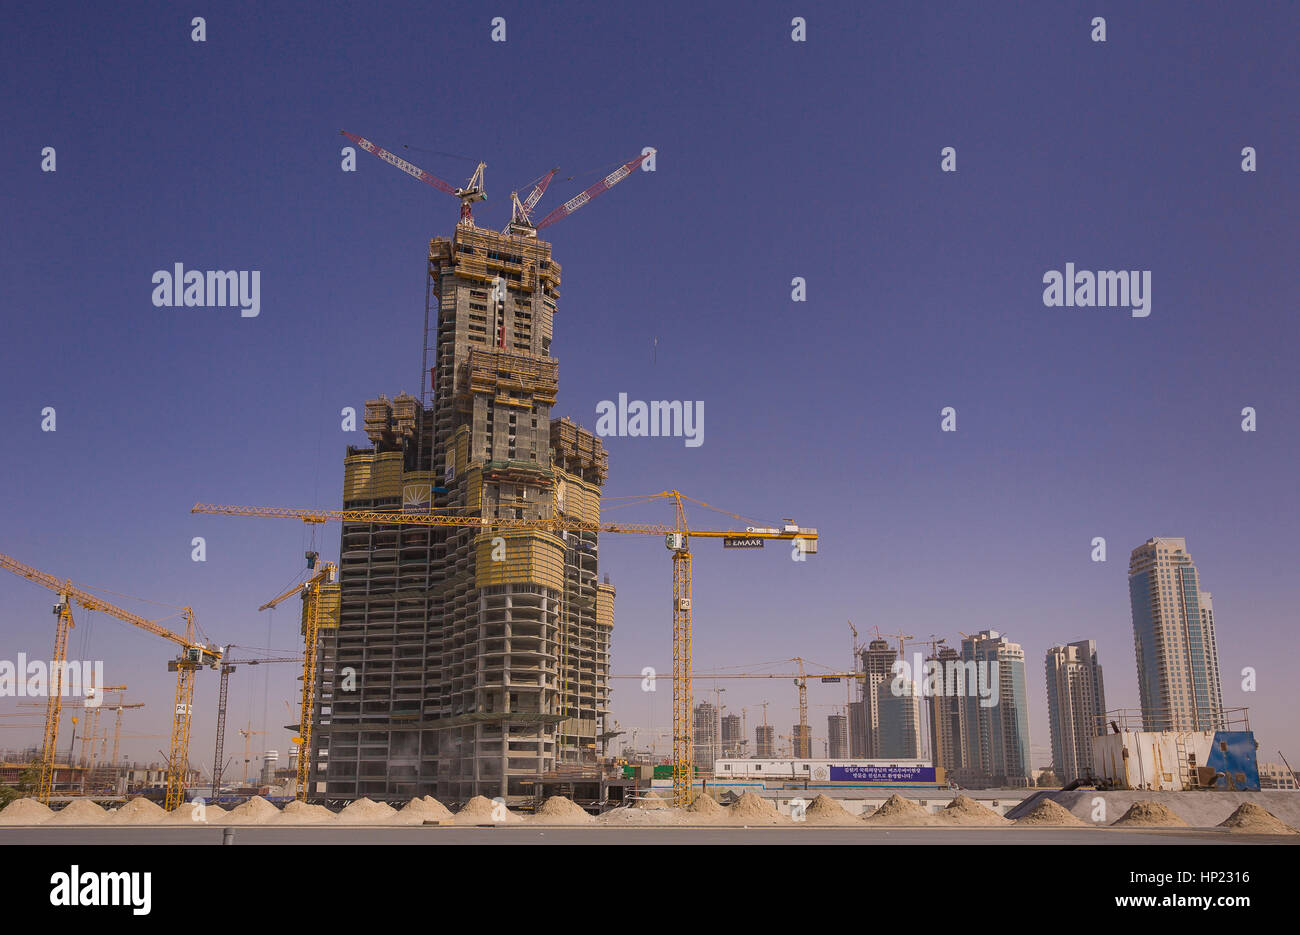 DUBAI, UNITED ARAB EMIRATES - construction site of Burj Khalifa, on Sheikh Zayed Road in Dubai. The 'Dubai Tower,' plans to be the world's tallest building at over 800 meters. Stock Photo